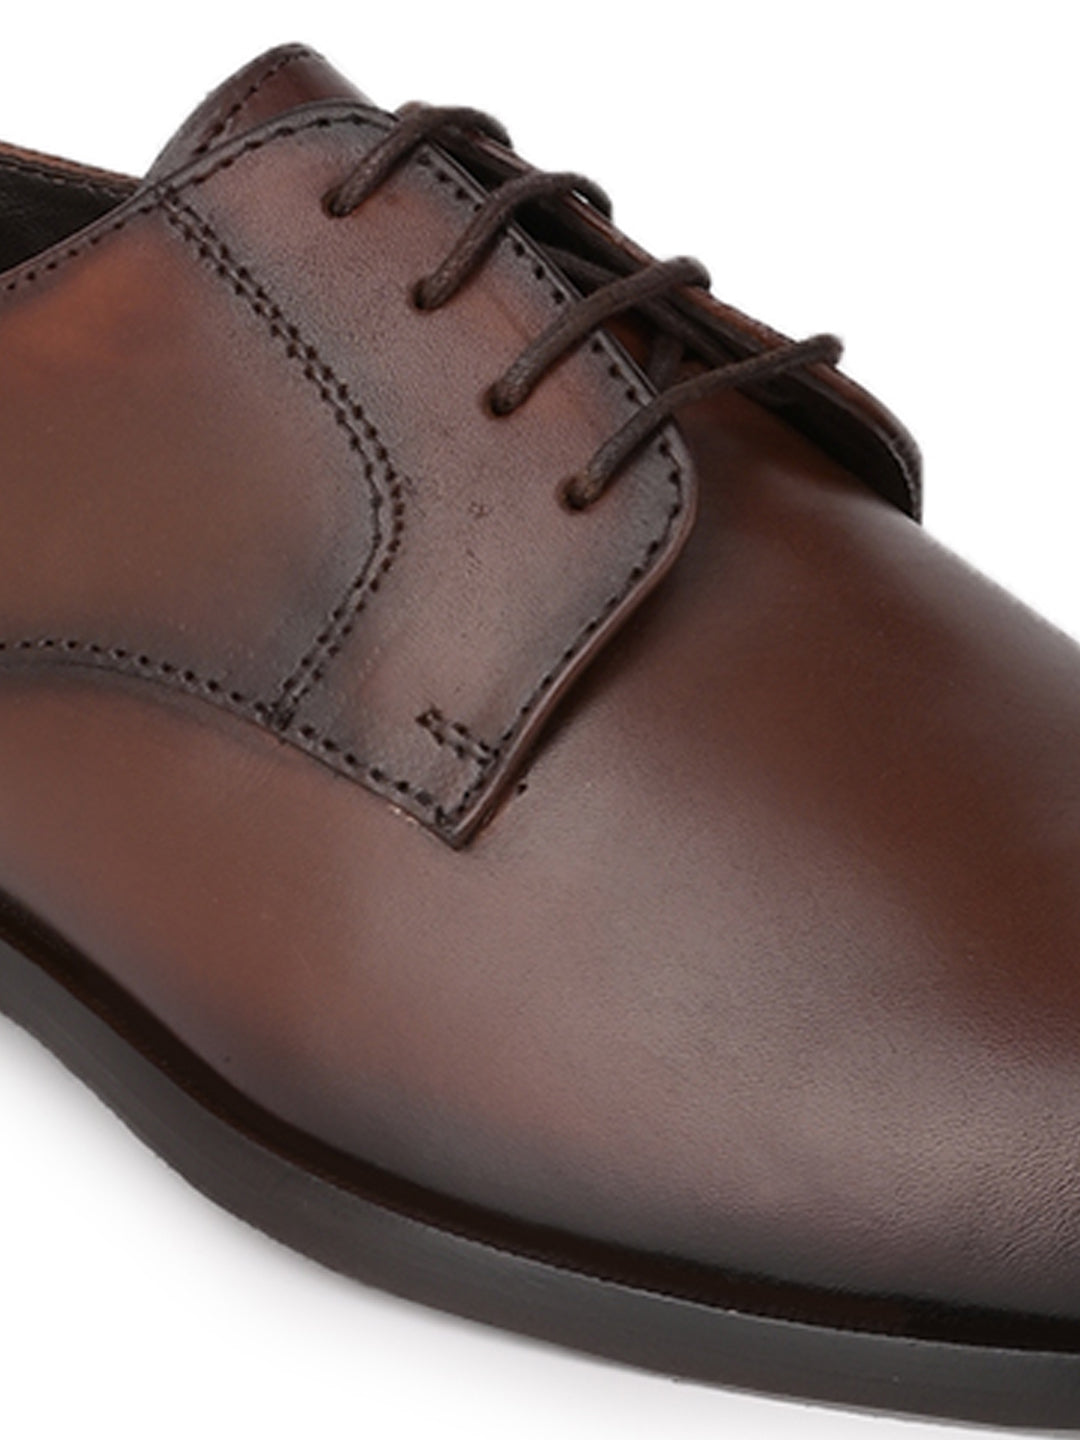 Men Coffee Solid Derby Formal Shoes